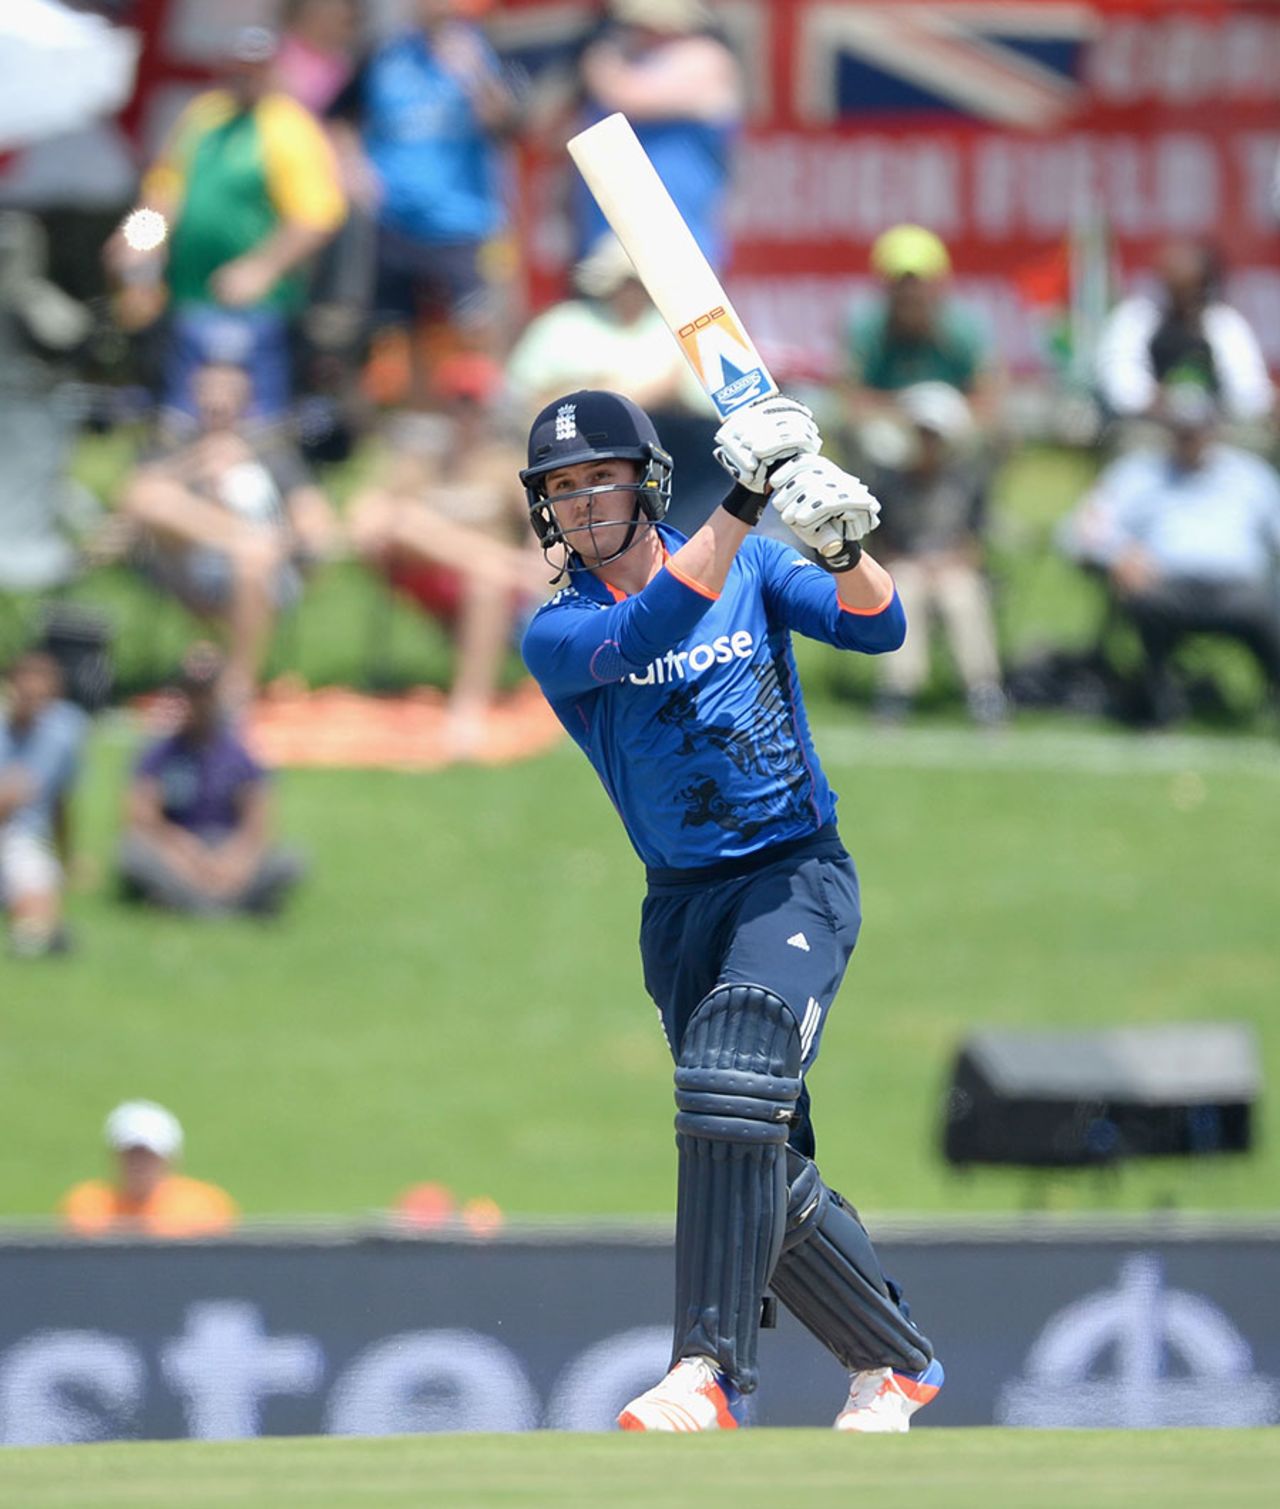 Jason Roy ran himself out for 20 after a strong start, South Africa v England, 3rd ODI, Centurion, February 9, 2016